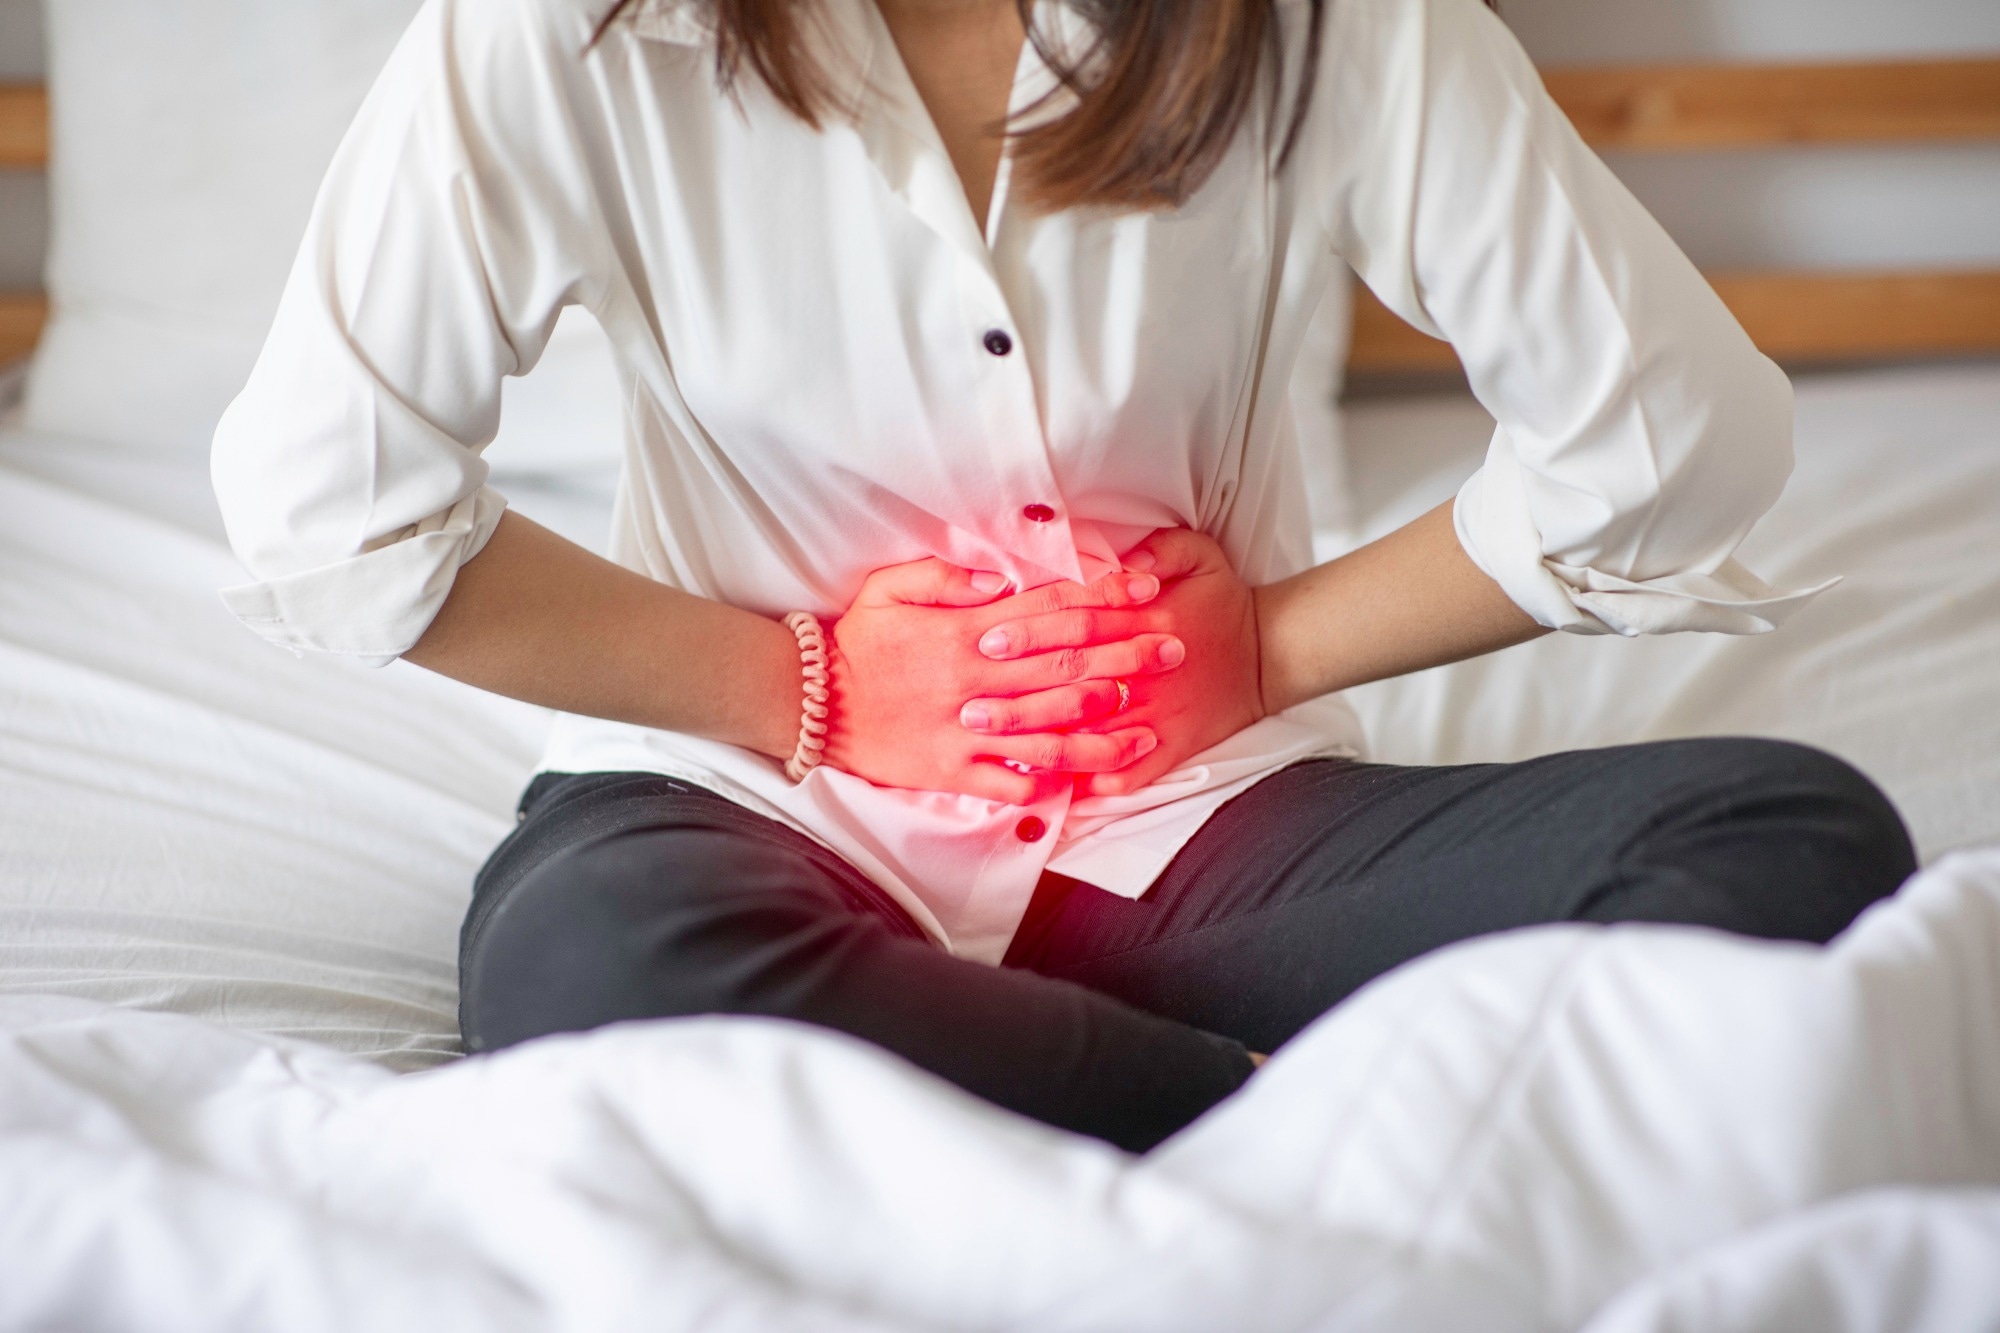 Study: Multi-drug resistance of Escherichia coli from outpatient uncomplicated urinary tract infections in a large U.S. integrated health care organization. Image Credit: 220 Selfmade studio / Shutterstock.com